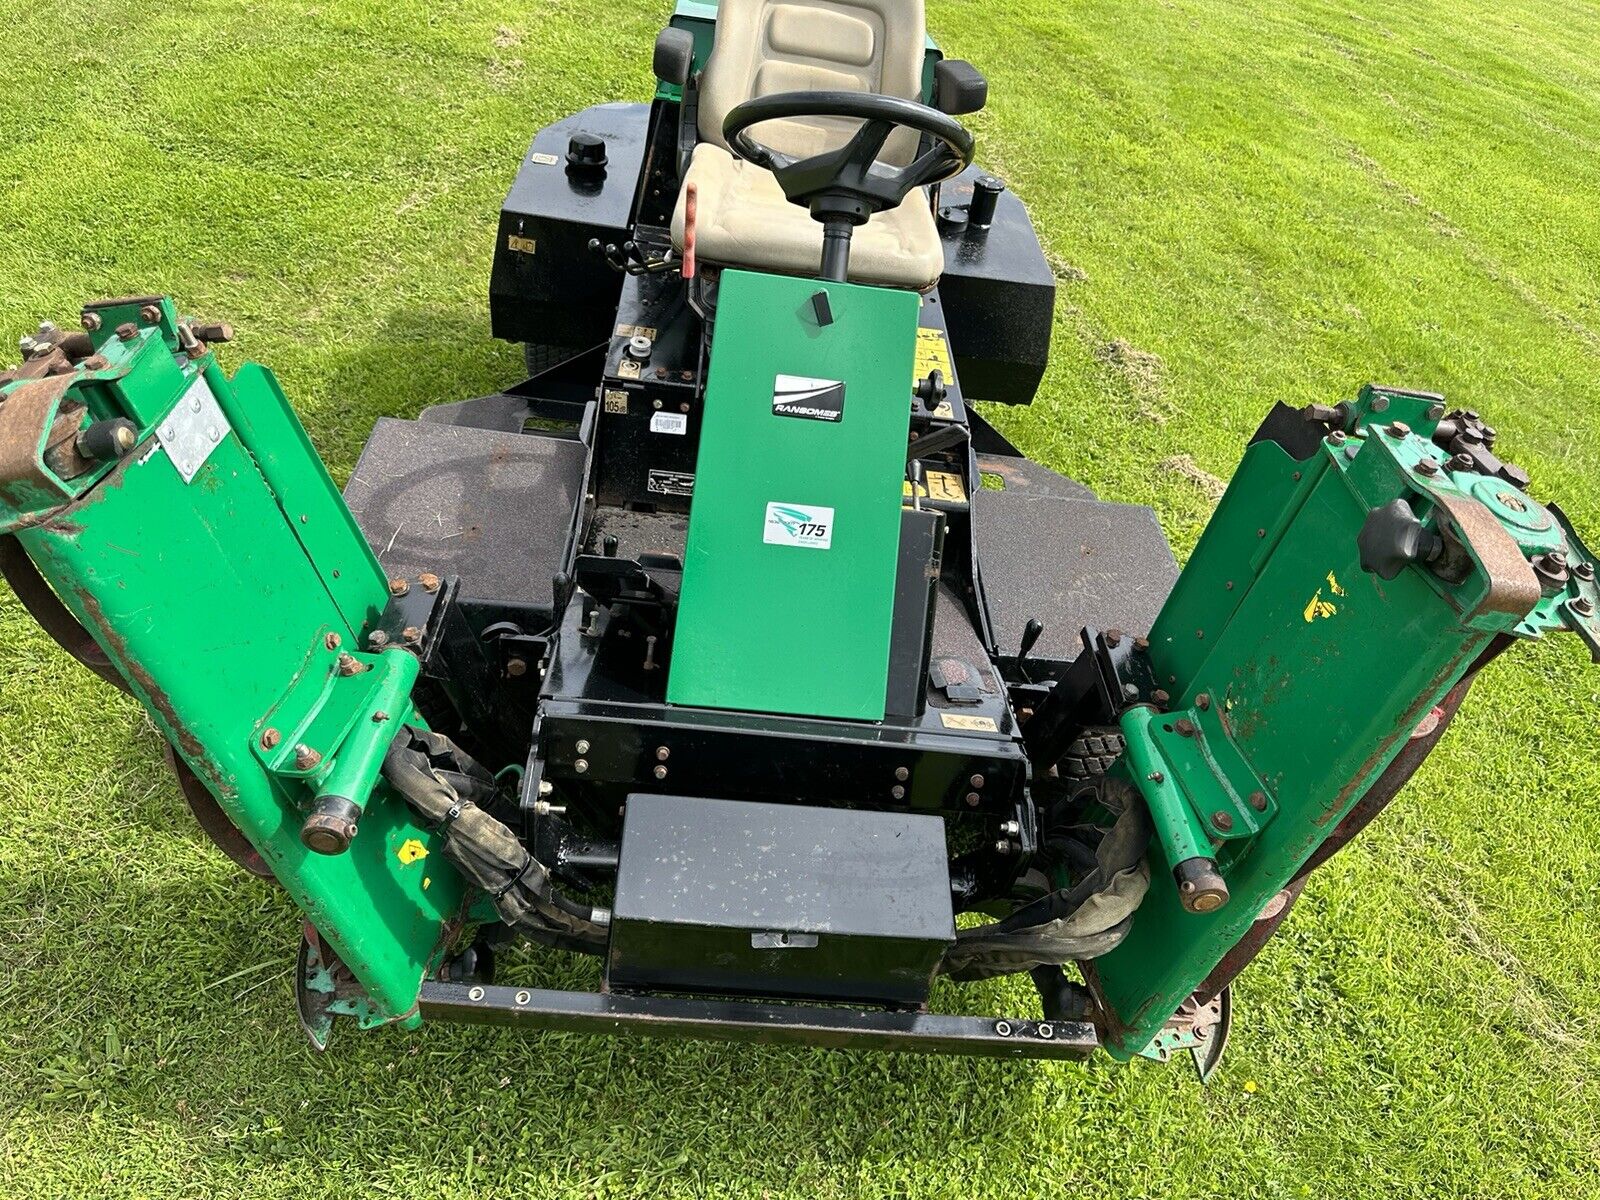 RANSOMES HIGHWAY 2130 TRIPLE CYLINDER RIDE SIT ON LAWN MOWER PARKWAY 3